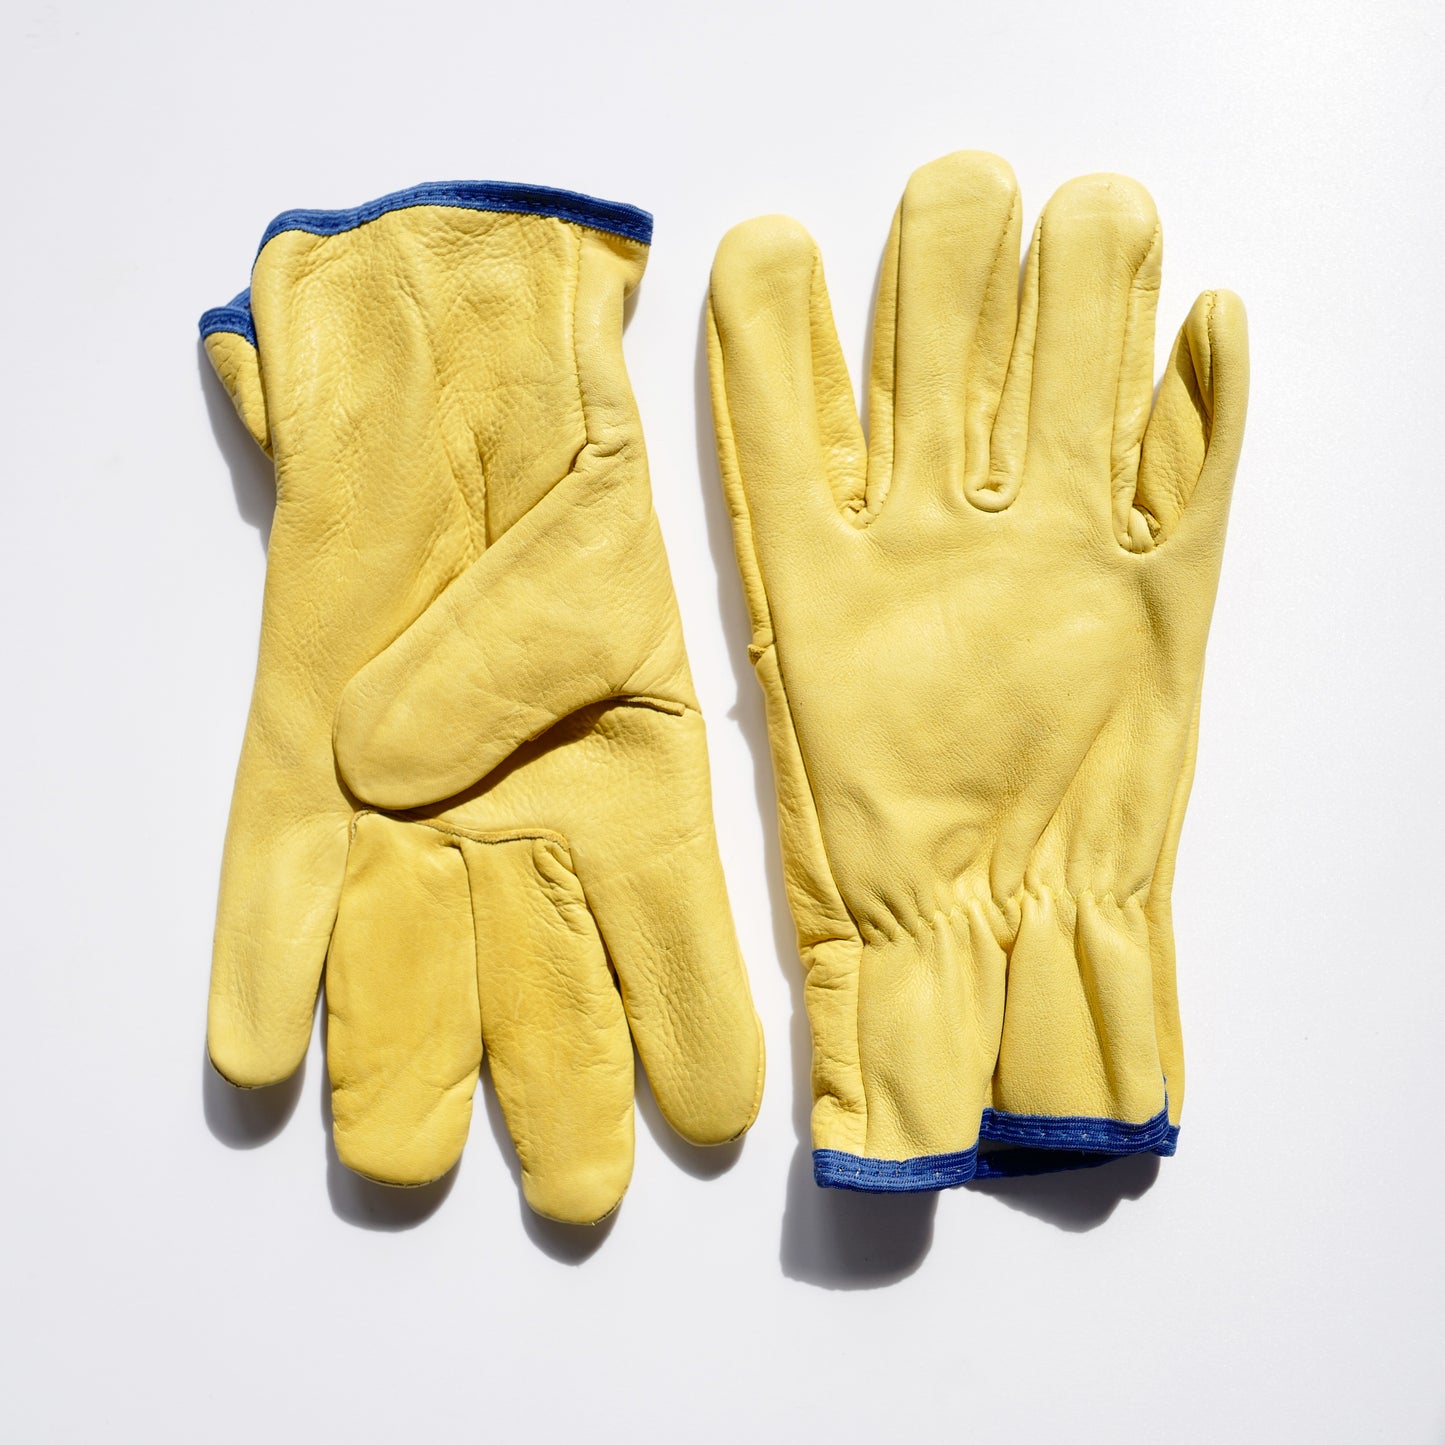 Lined Leather Gardening Gloves